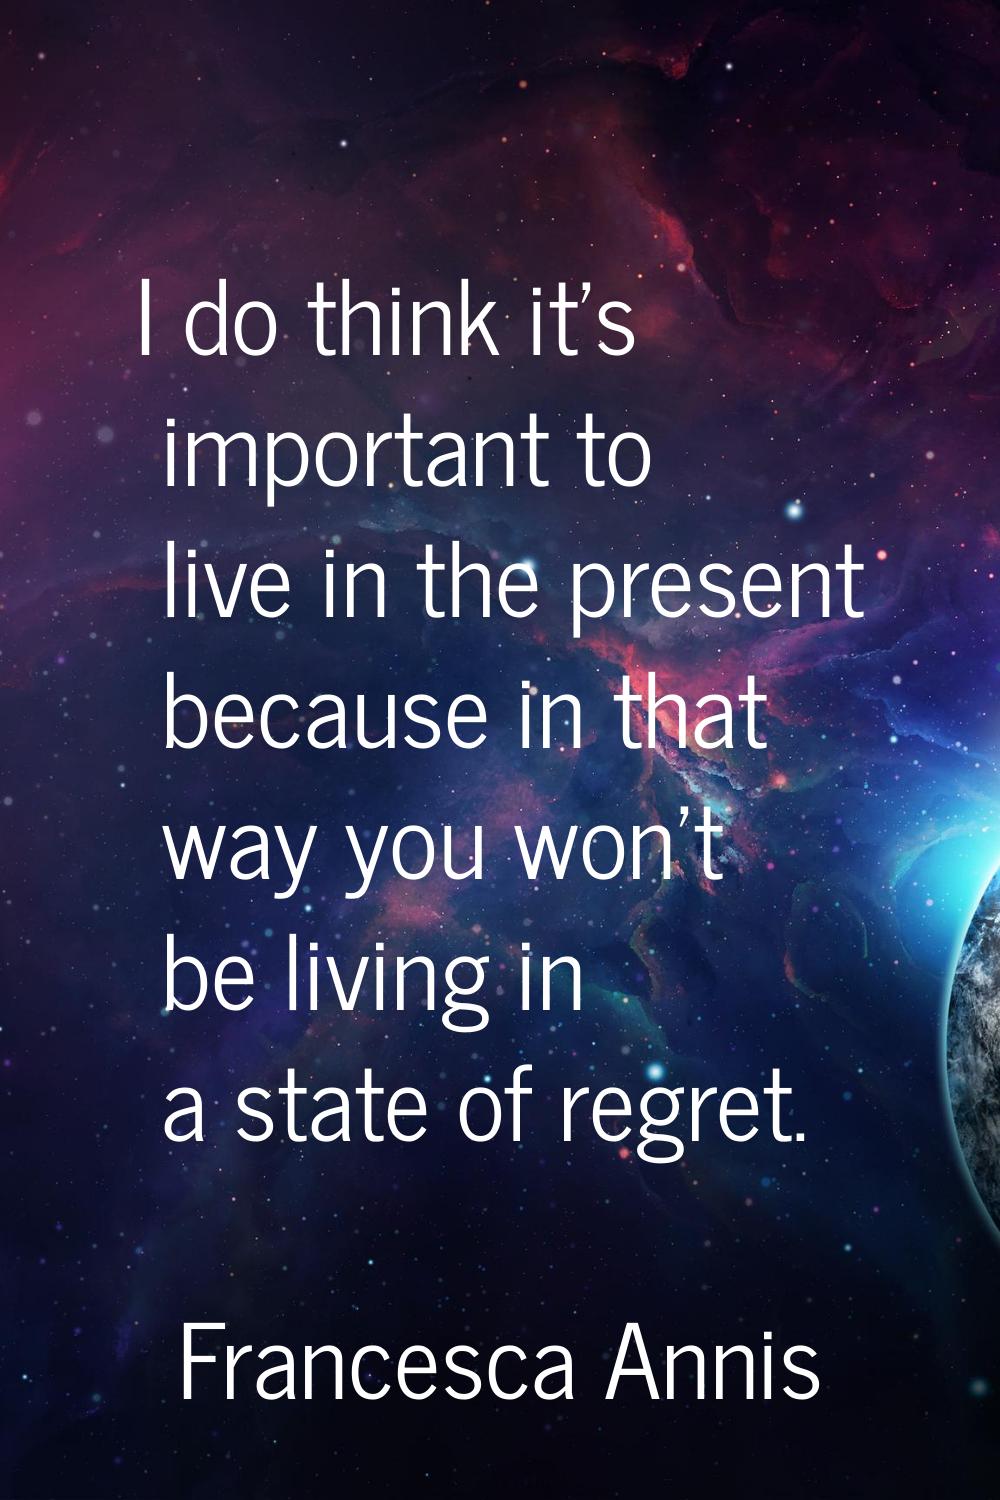 I do think it's important to live in the present because in that way you won't be living in a state